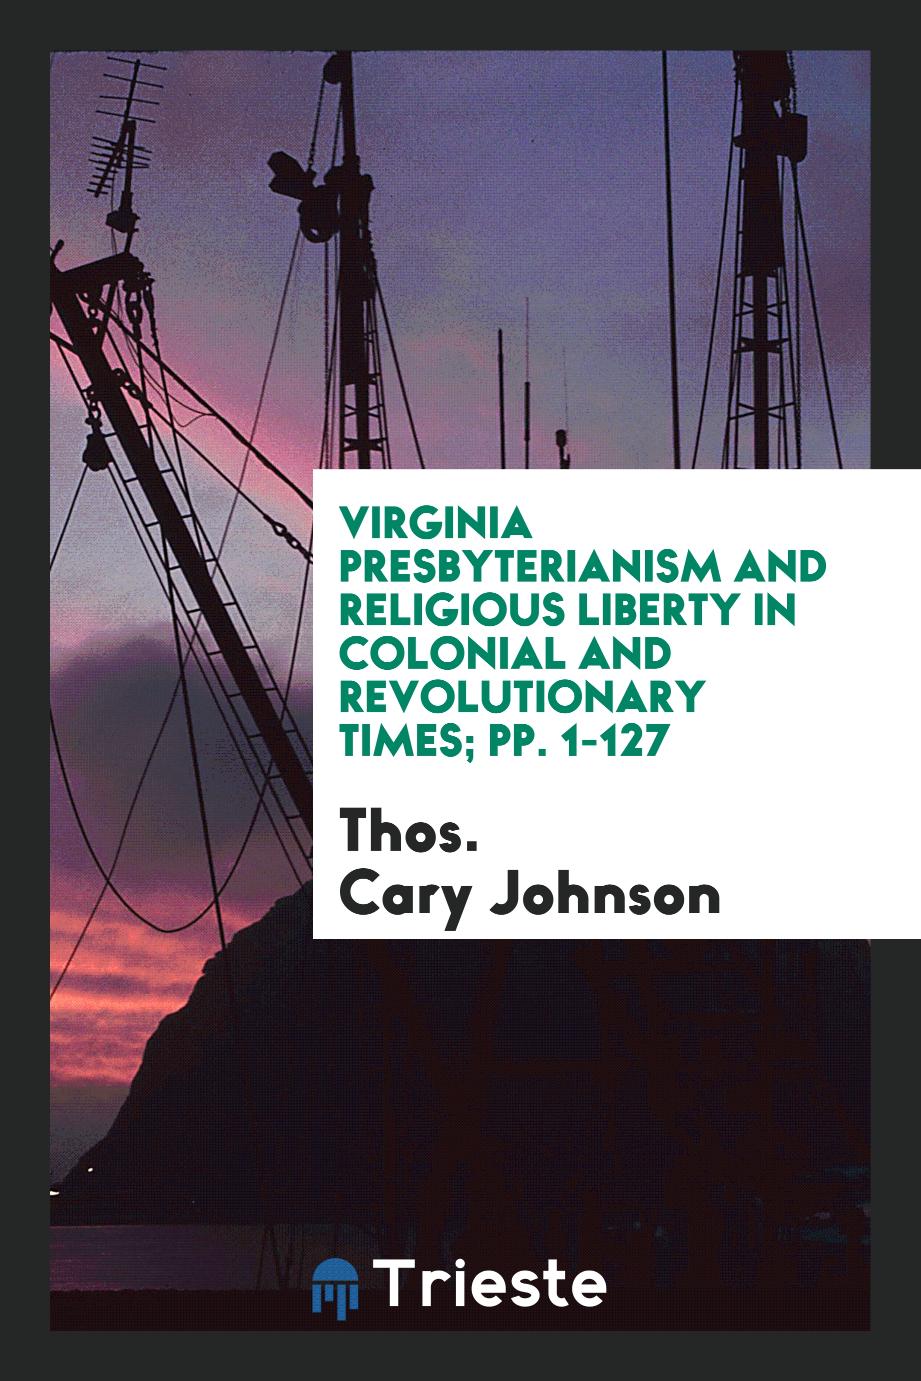 Virginia Presbyterianism and Religious Liberty in Colonial and Revolutionary Times; pp. 1-127